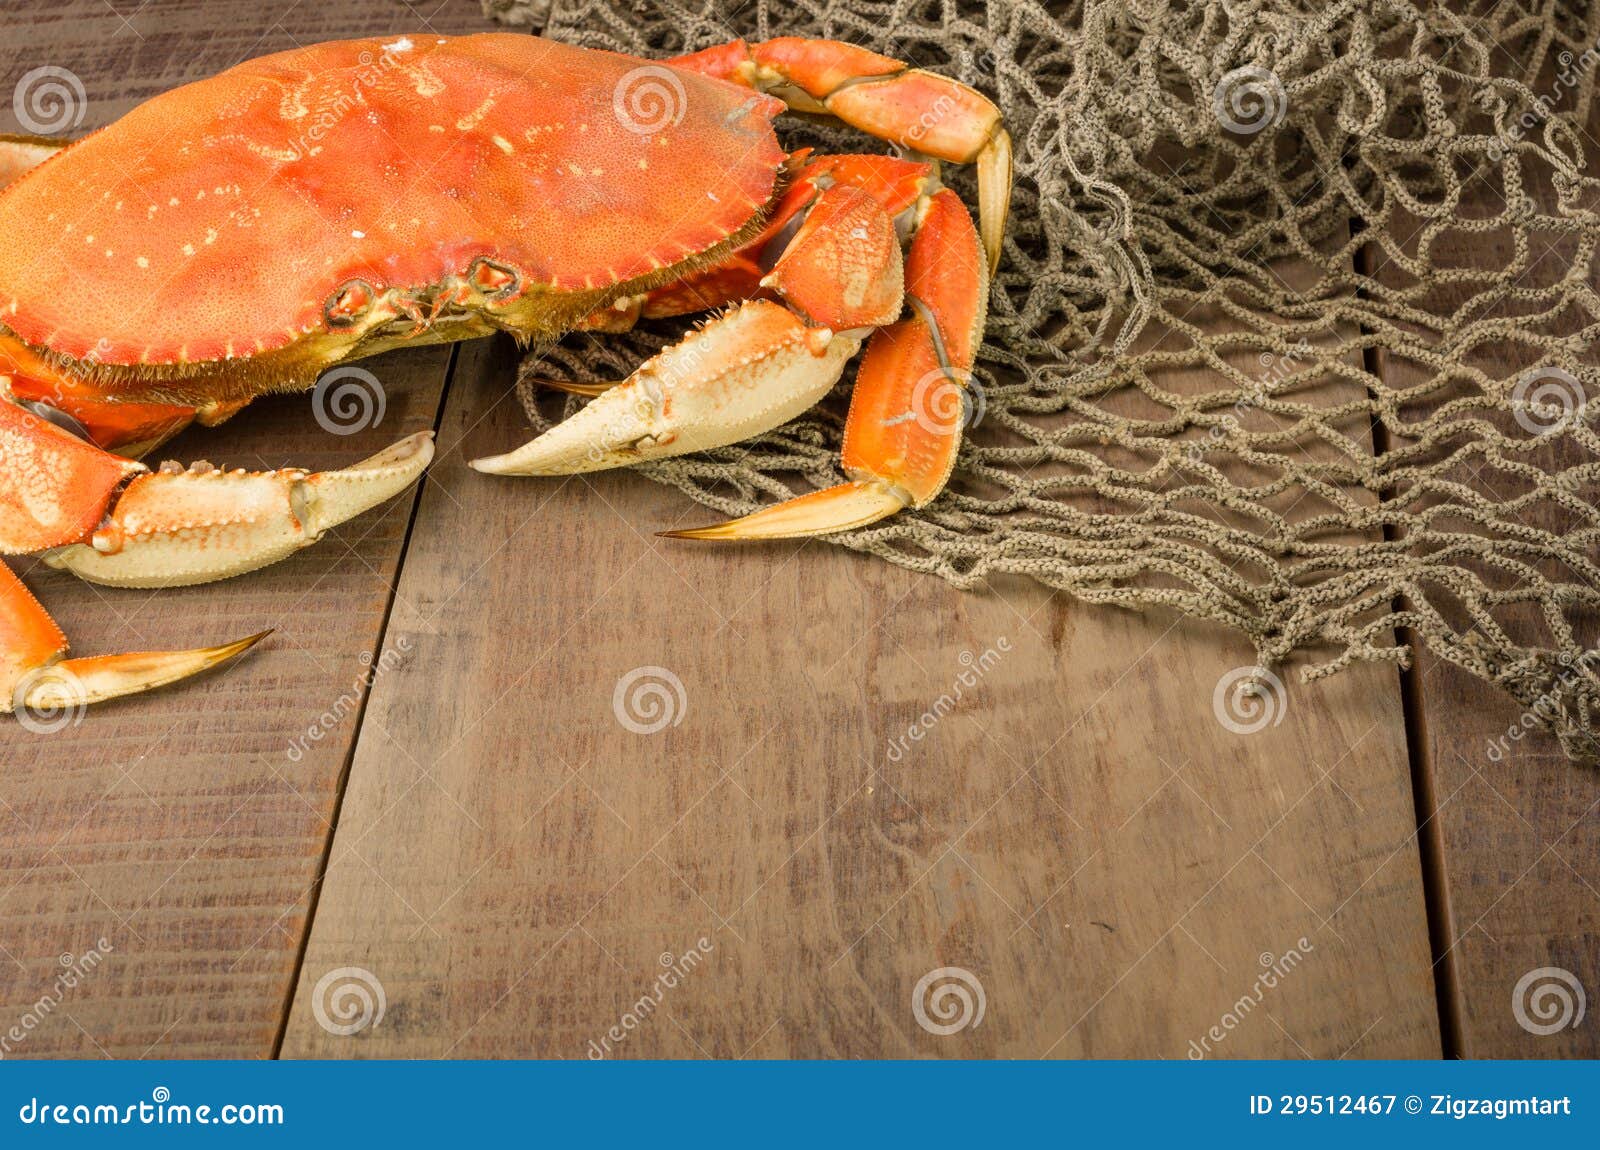 9,421 Crab Net Royalty-Free Photos and Stock Images